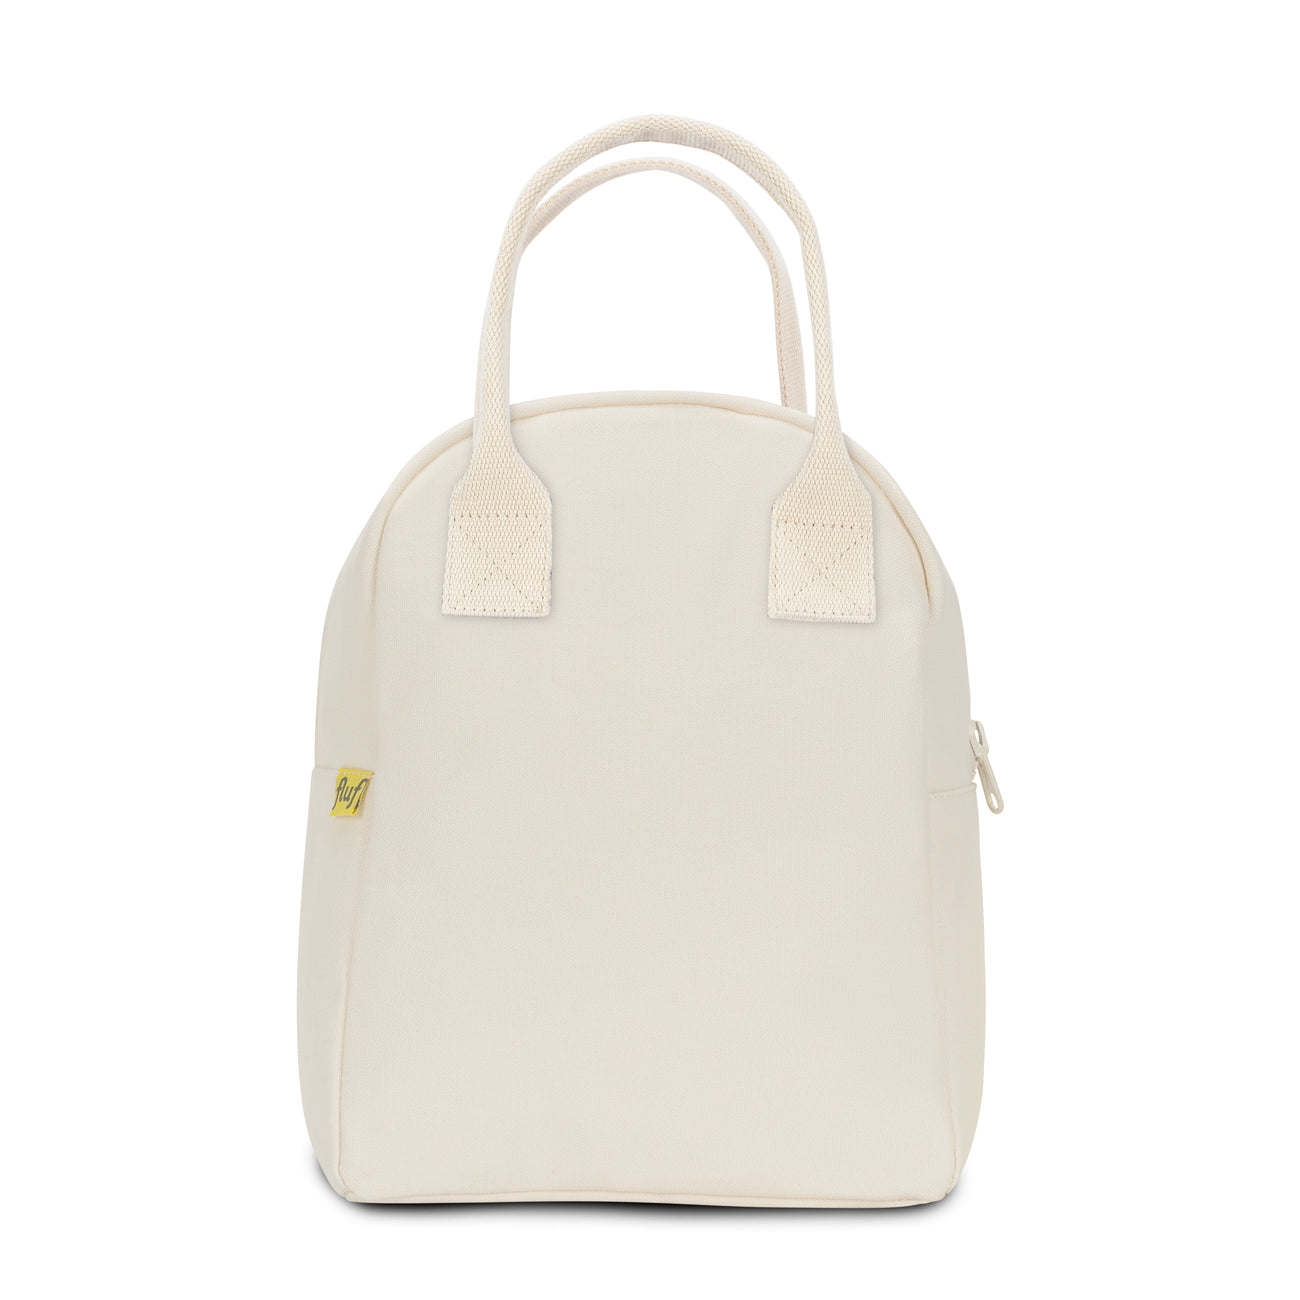 Zipper Lunch bag  Natural color by fluf